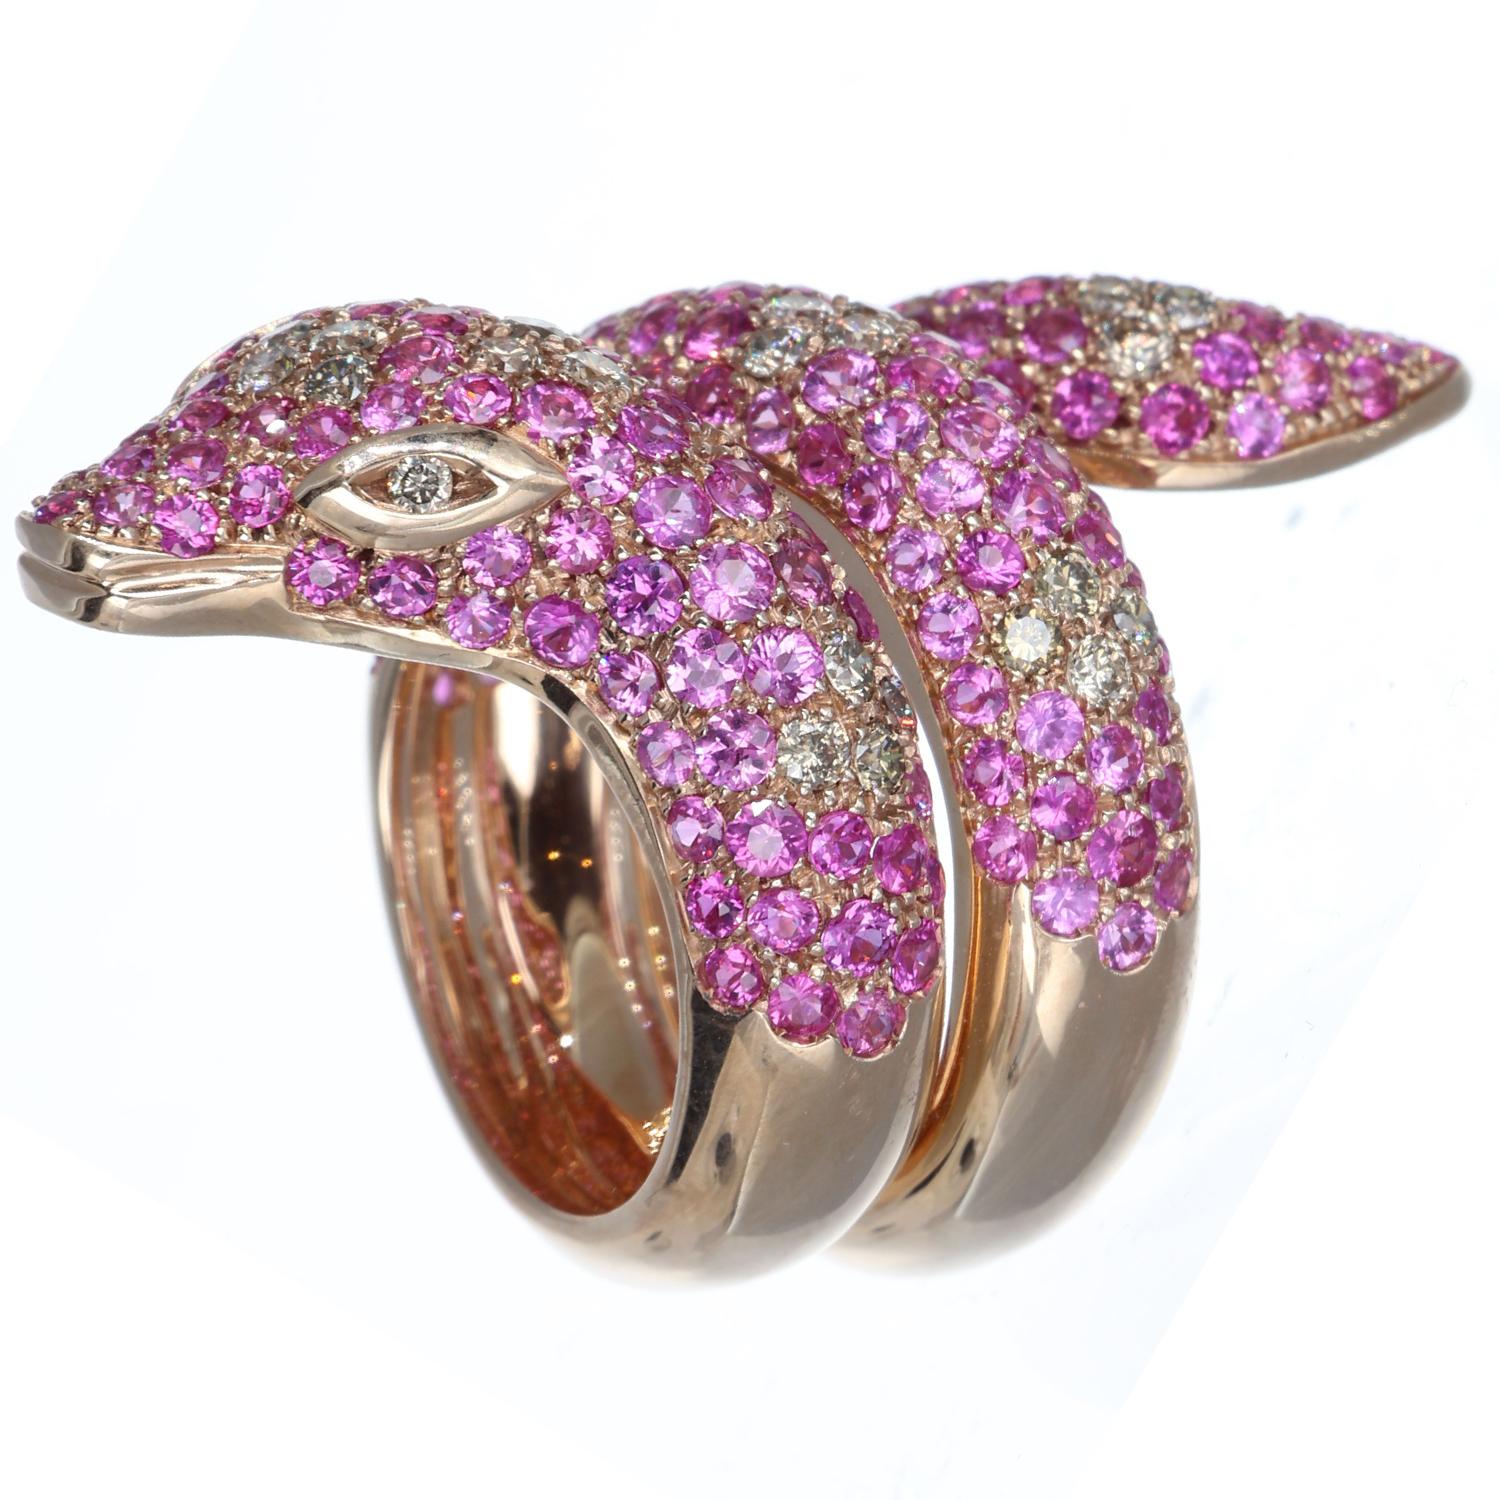 The 9kt rose gold snake ring is a captivating symphony of hues and radiance, a jewel that wraps the finger with a promise of enduring beauty. Pink sapphires, weighing 5.20 ct, deck this piece with burning passion, while 0.83 ct brown diamonds